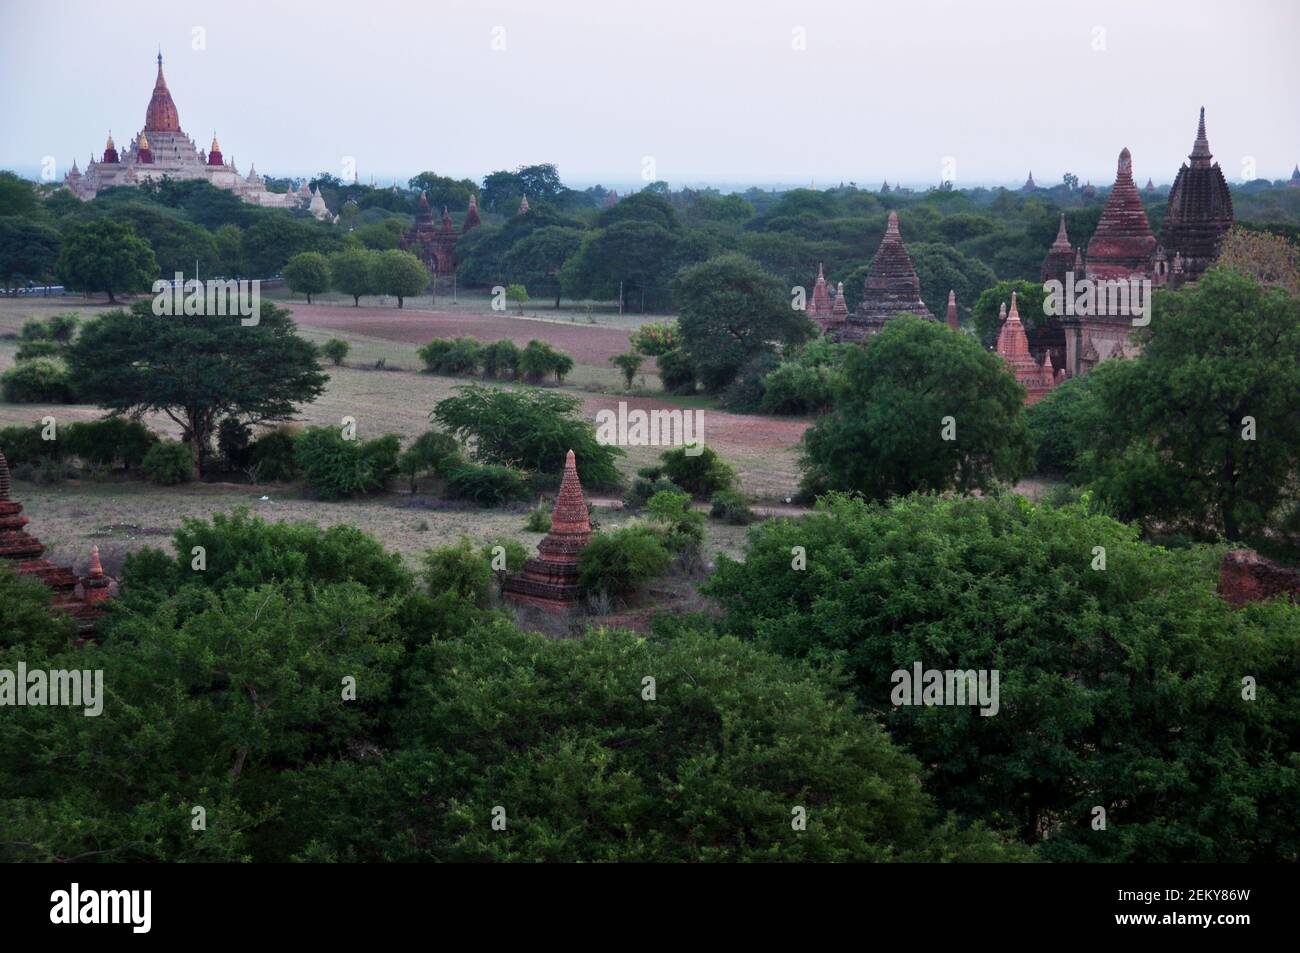 View landscape ruins cityscape World Heritage Site with over 2000 pagodas and Htilominlo temples look from Shwesandaw Paya Pagoda in morning time at B Stock Photo